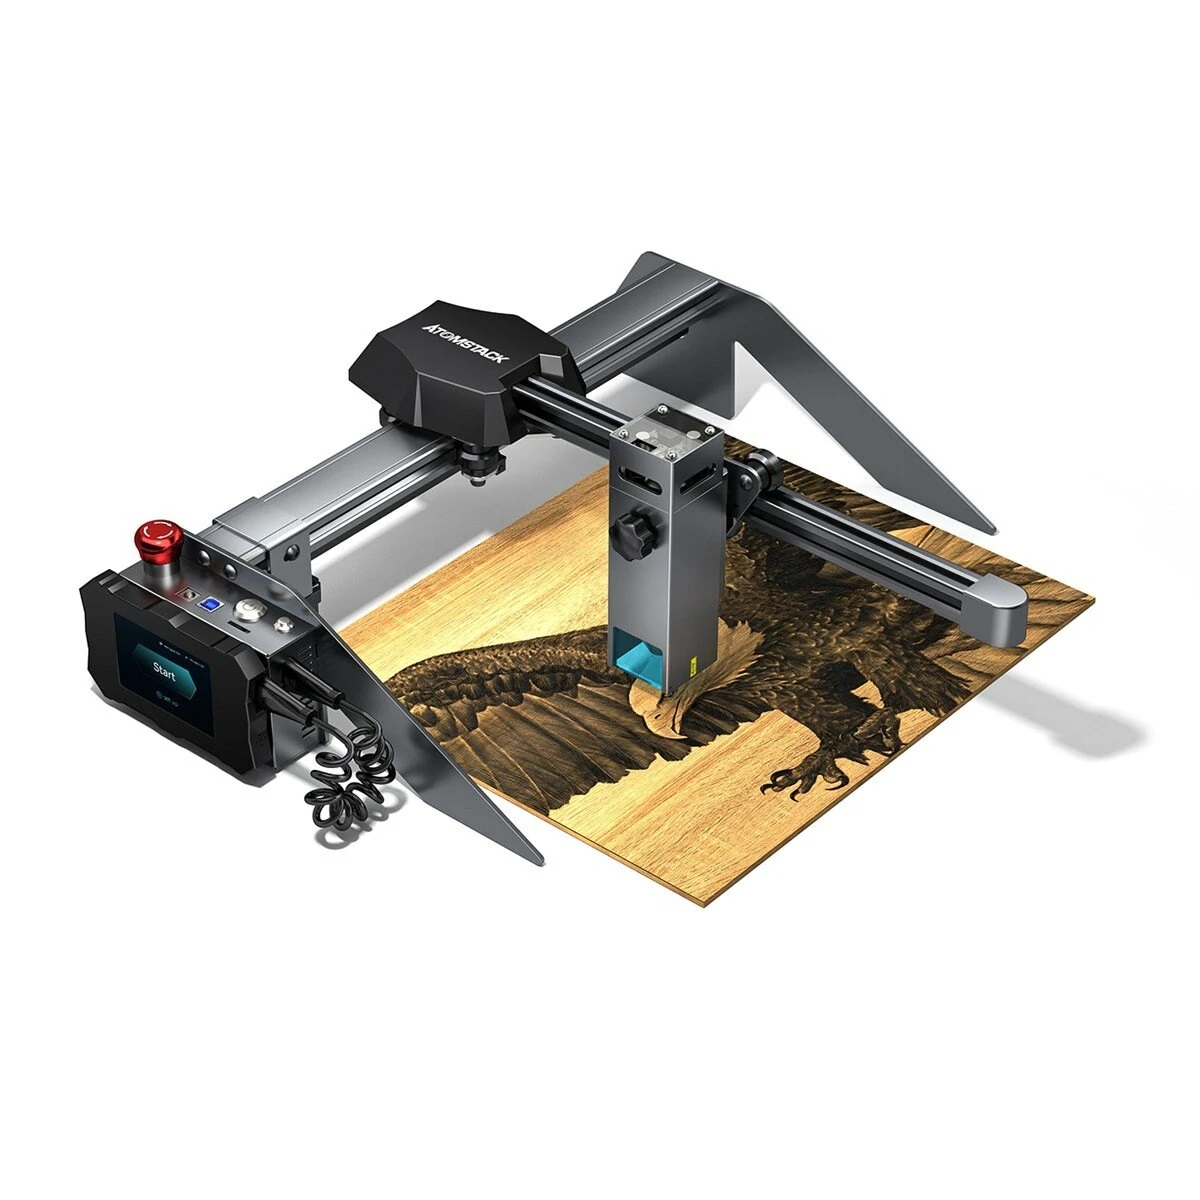 Find [EU DIRECT] New ATOMSTACK P9 M50 Portable Dual Laser Engraving Cutting Machine 10W Output Power DIY Laser Engraver Cutter 304 Mirror Stainless Steel Engraving Support Offline Engraving 20mm Wood Cutting 15mm Acrylic Cutting for Sale on Gipsybee.com with cryptocurrencies